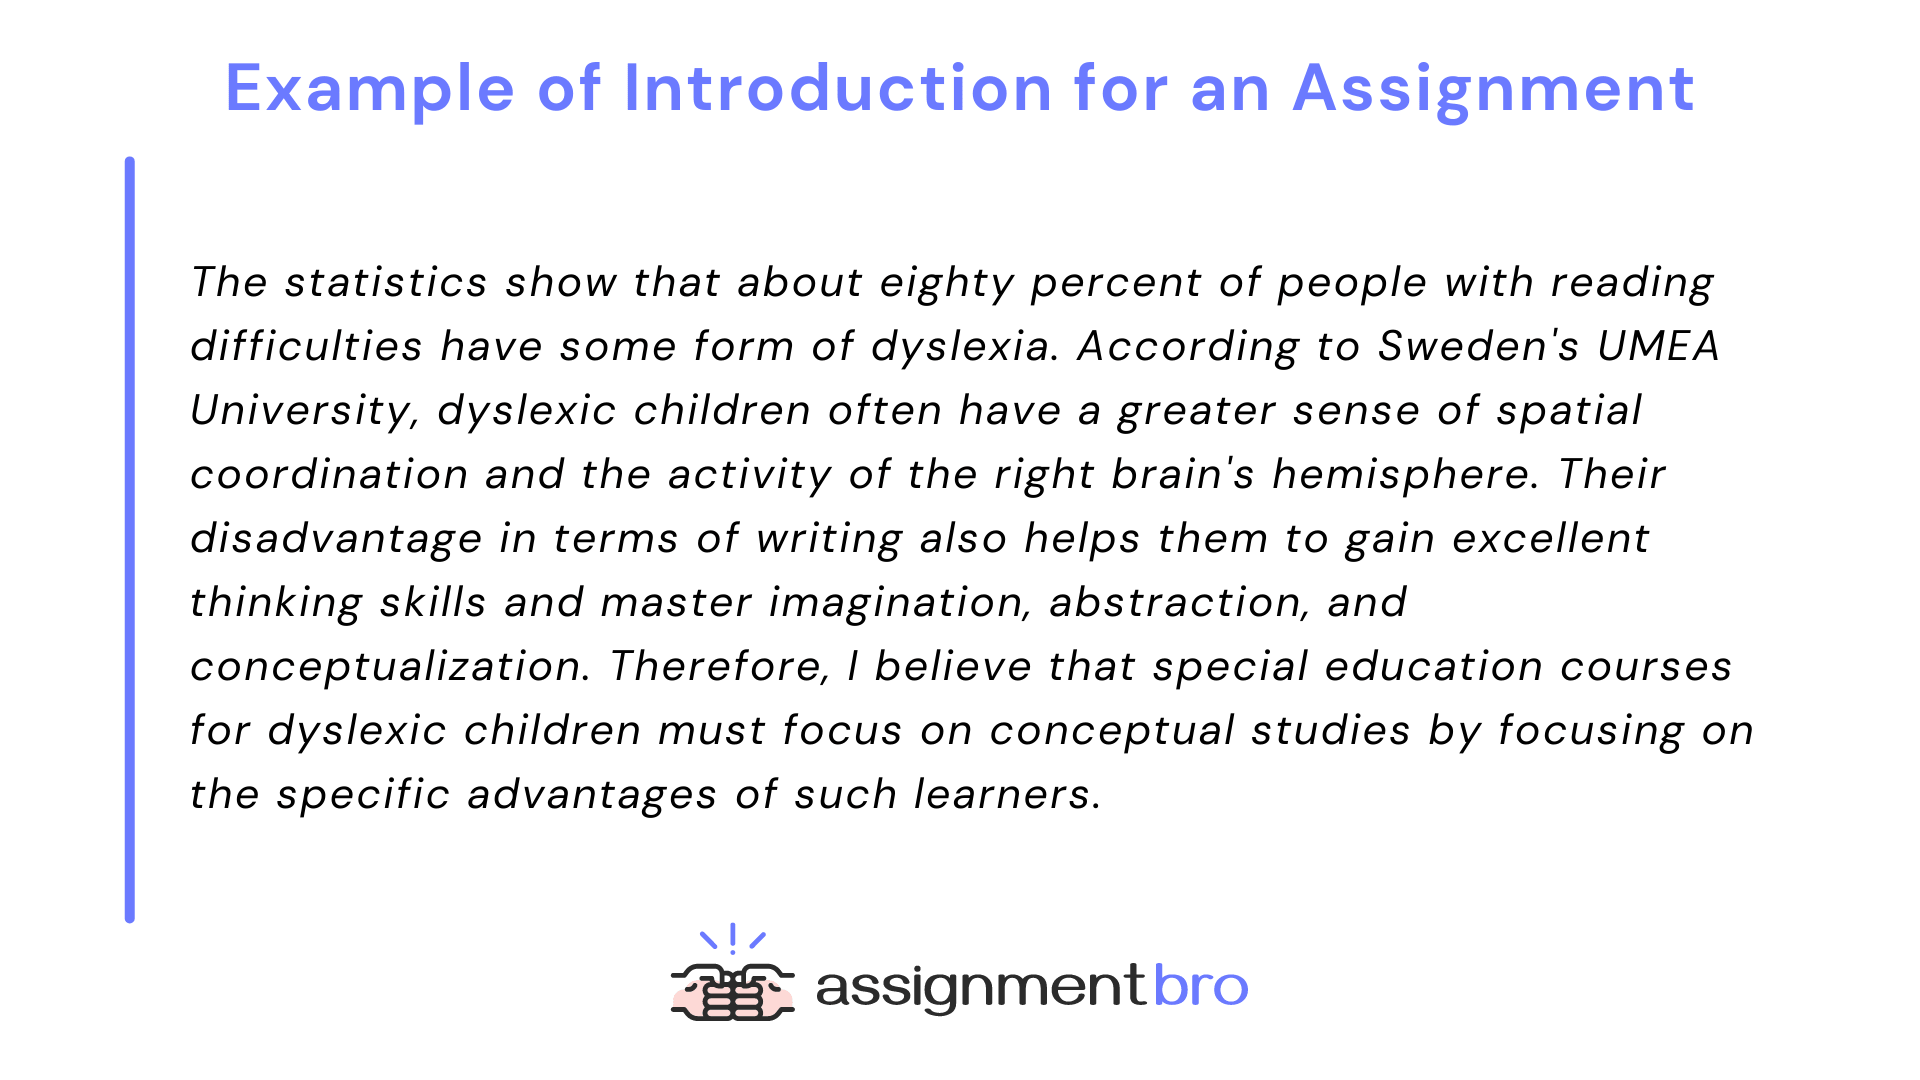 Example of Introduction for Assignment